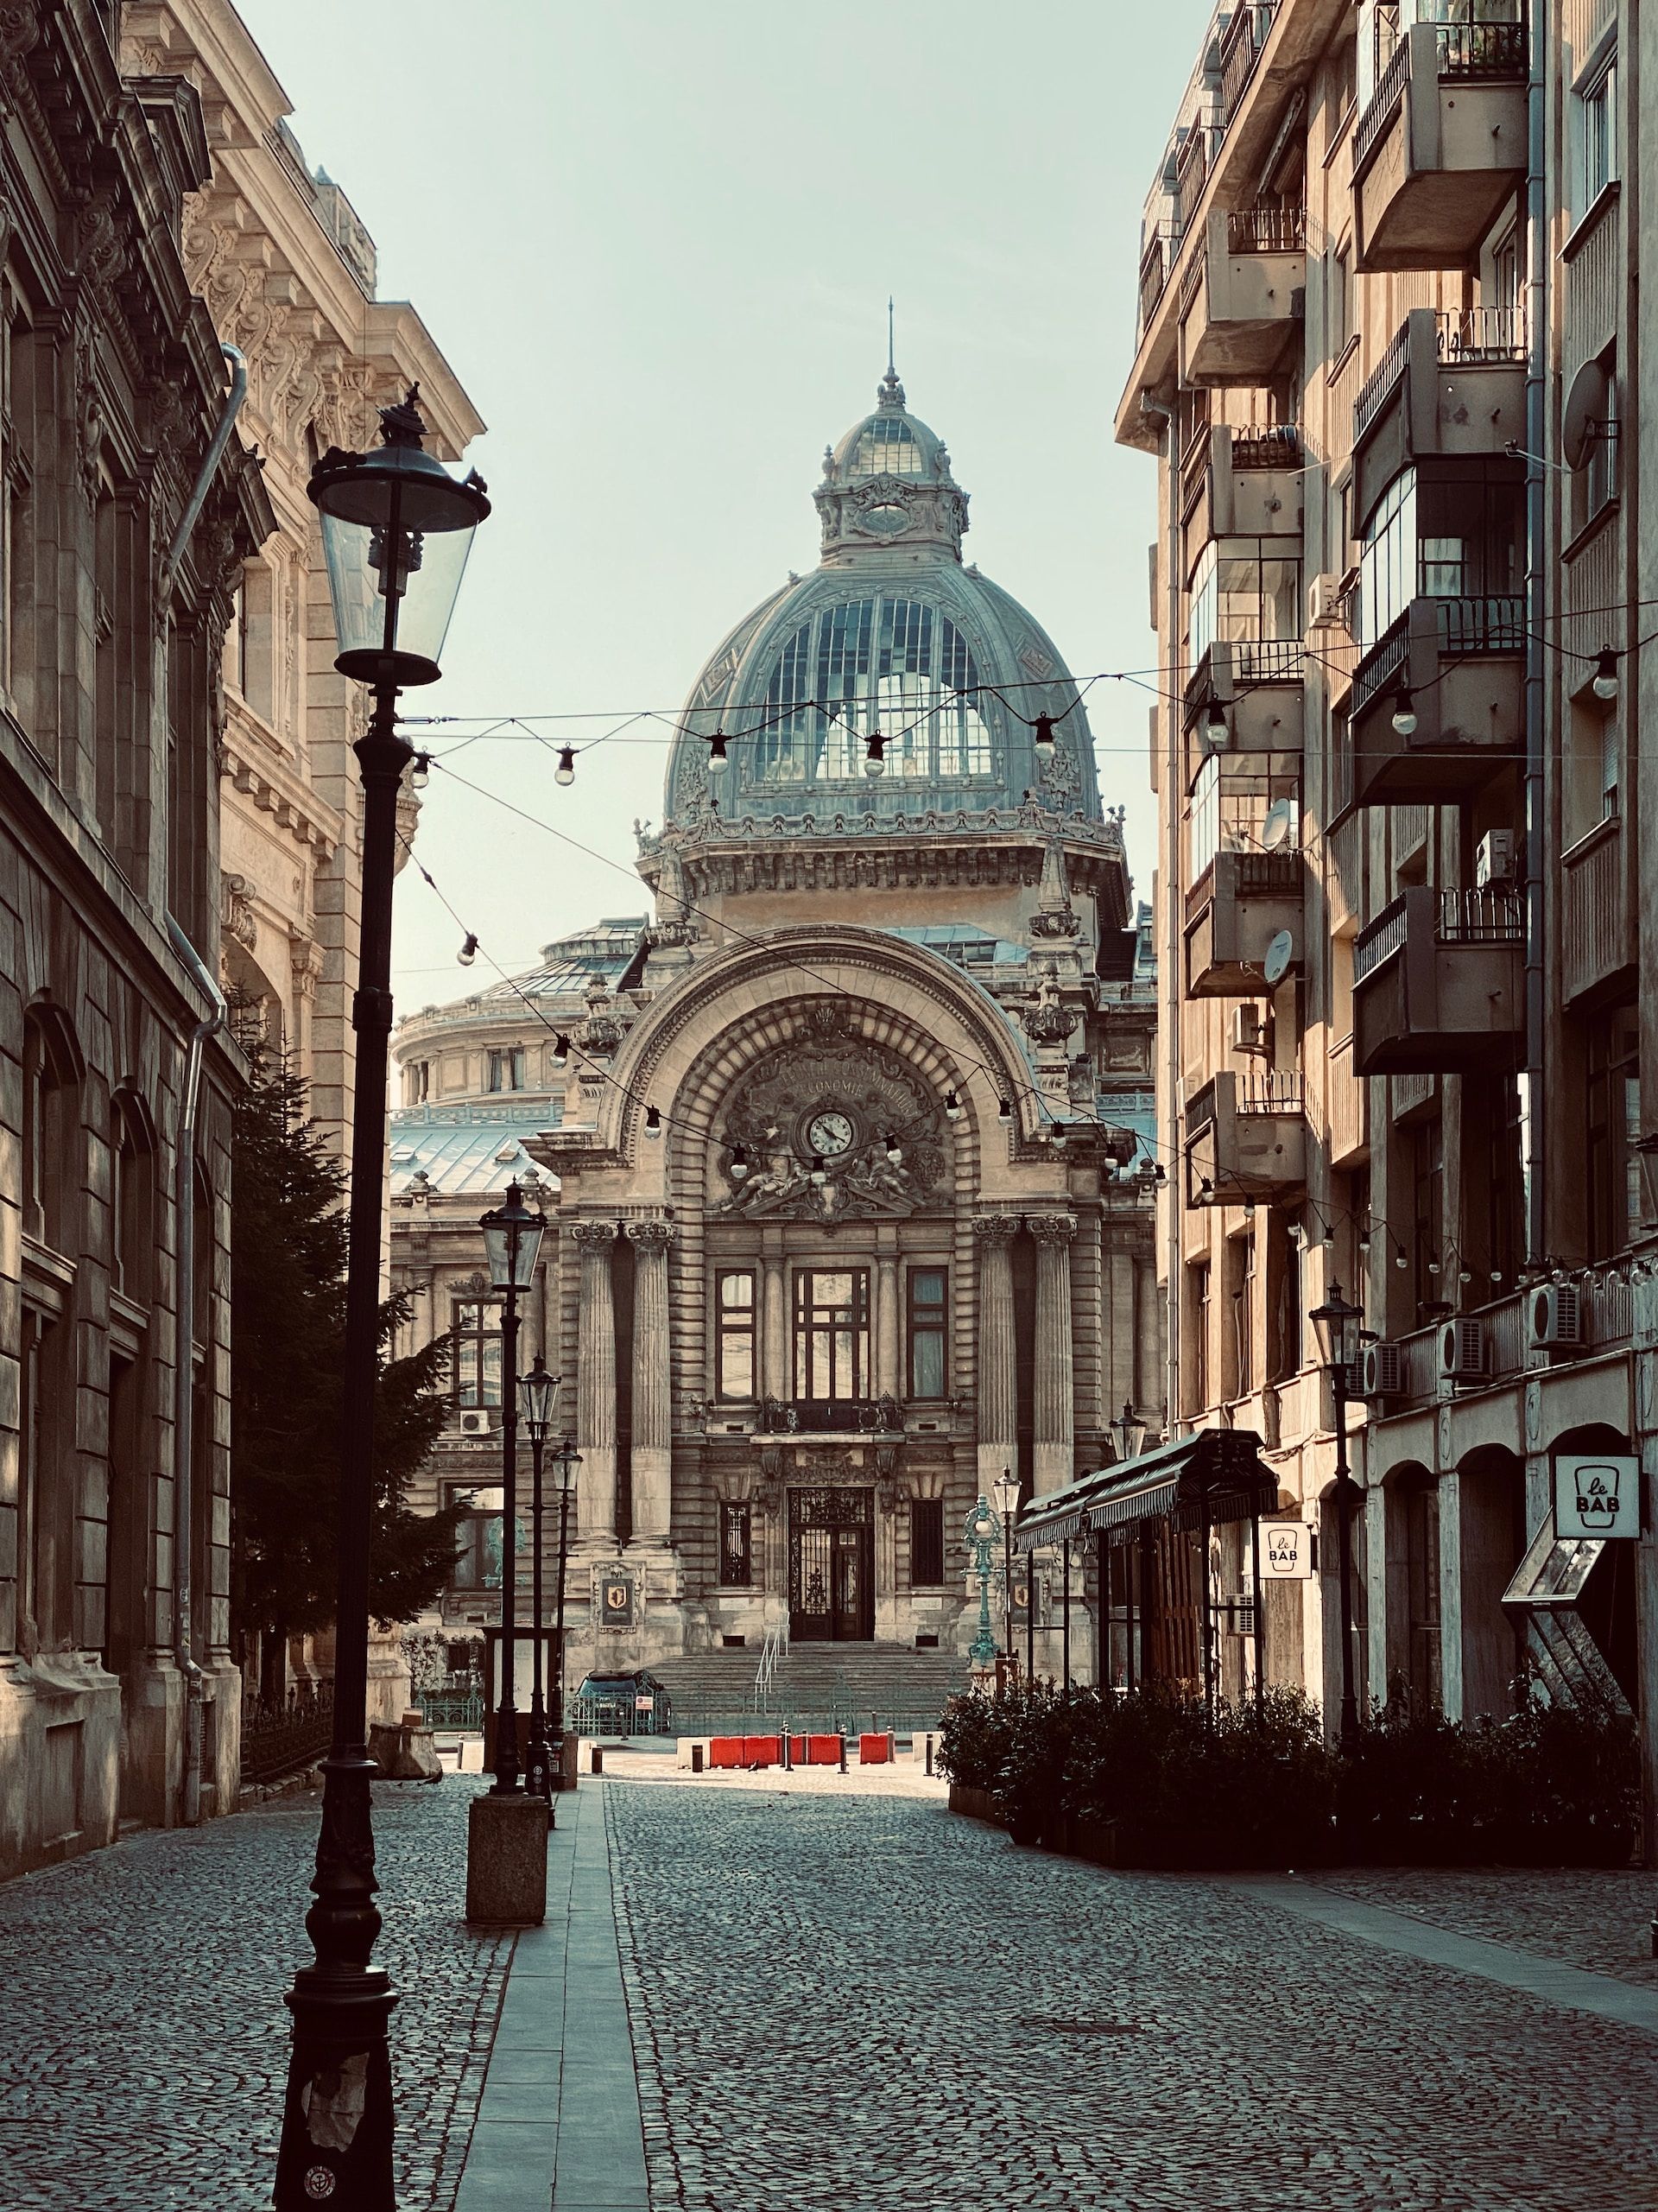 Historic cobbled streets and architecture in Bucharest, Romania